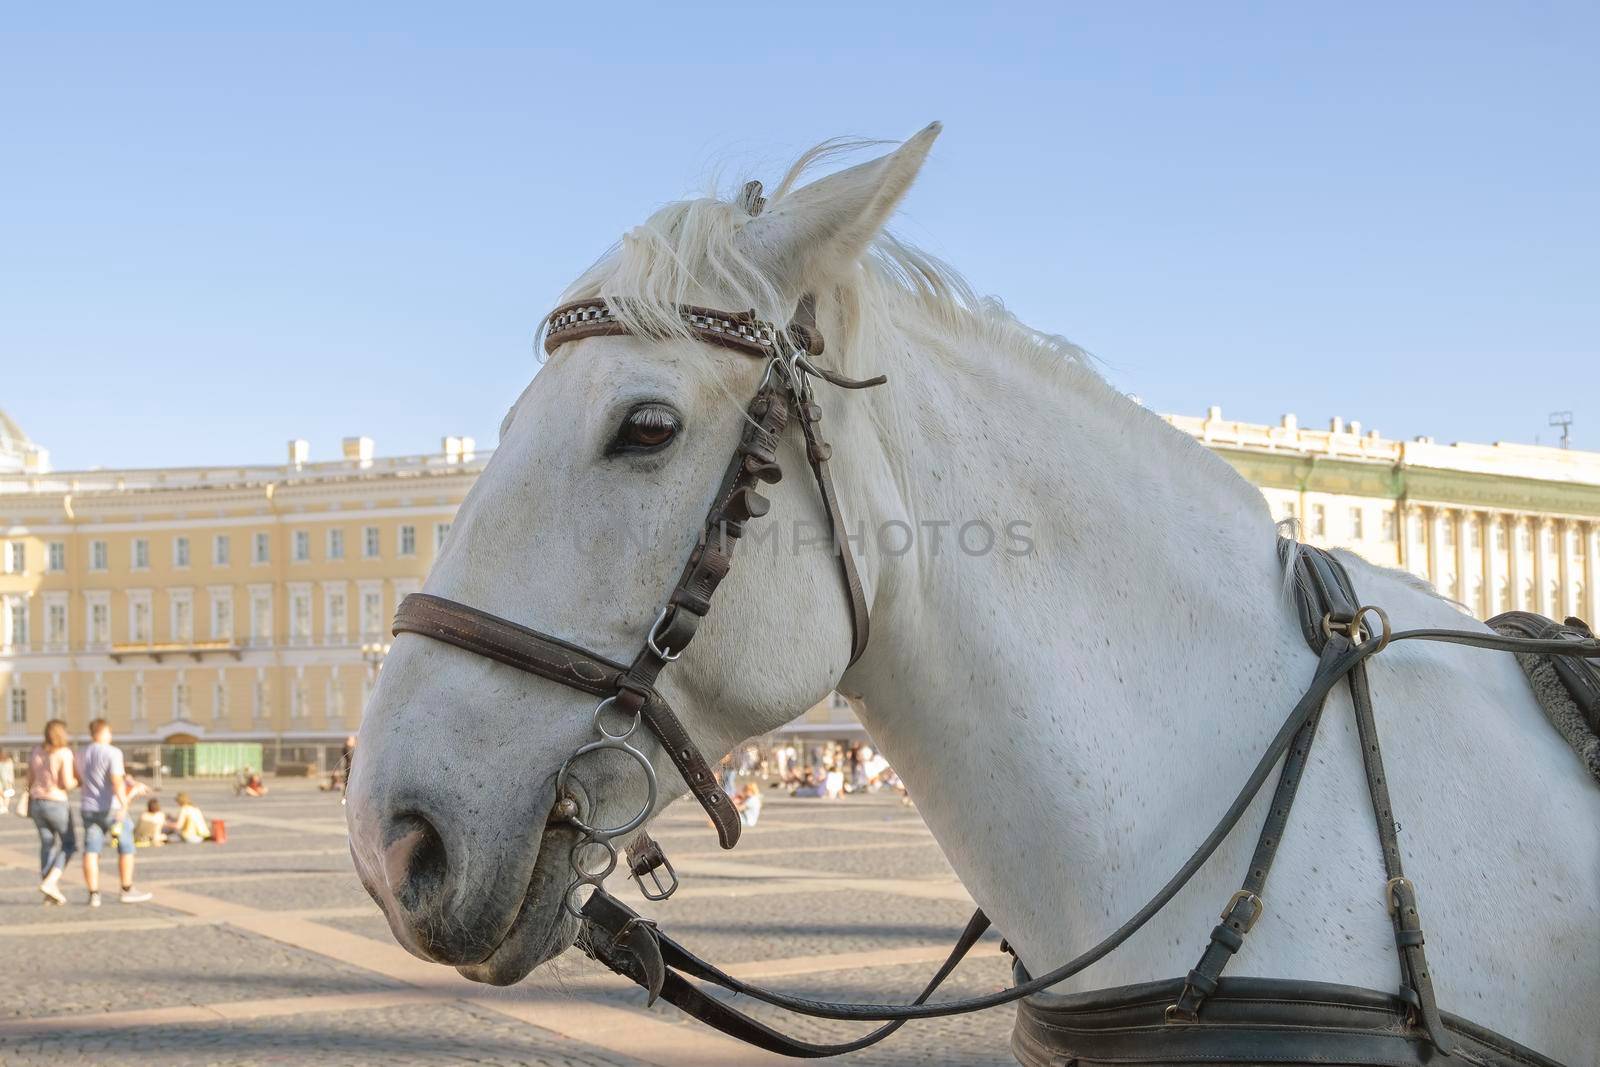 Horse harnessed to a stroller in the city square by OlgaGubskaya